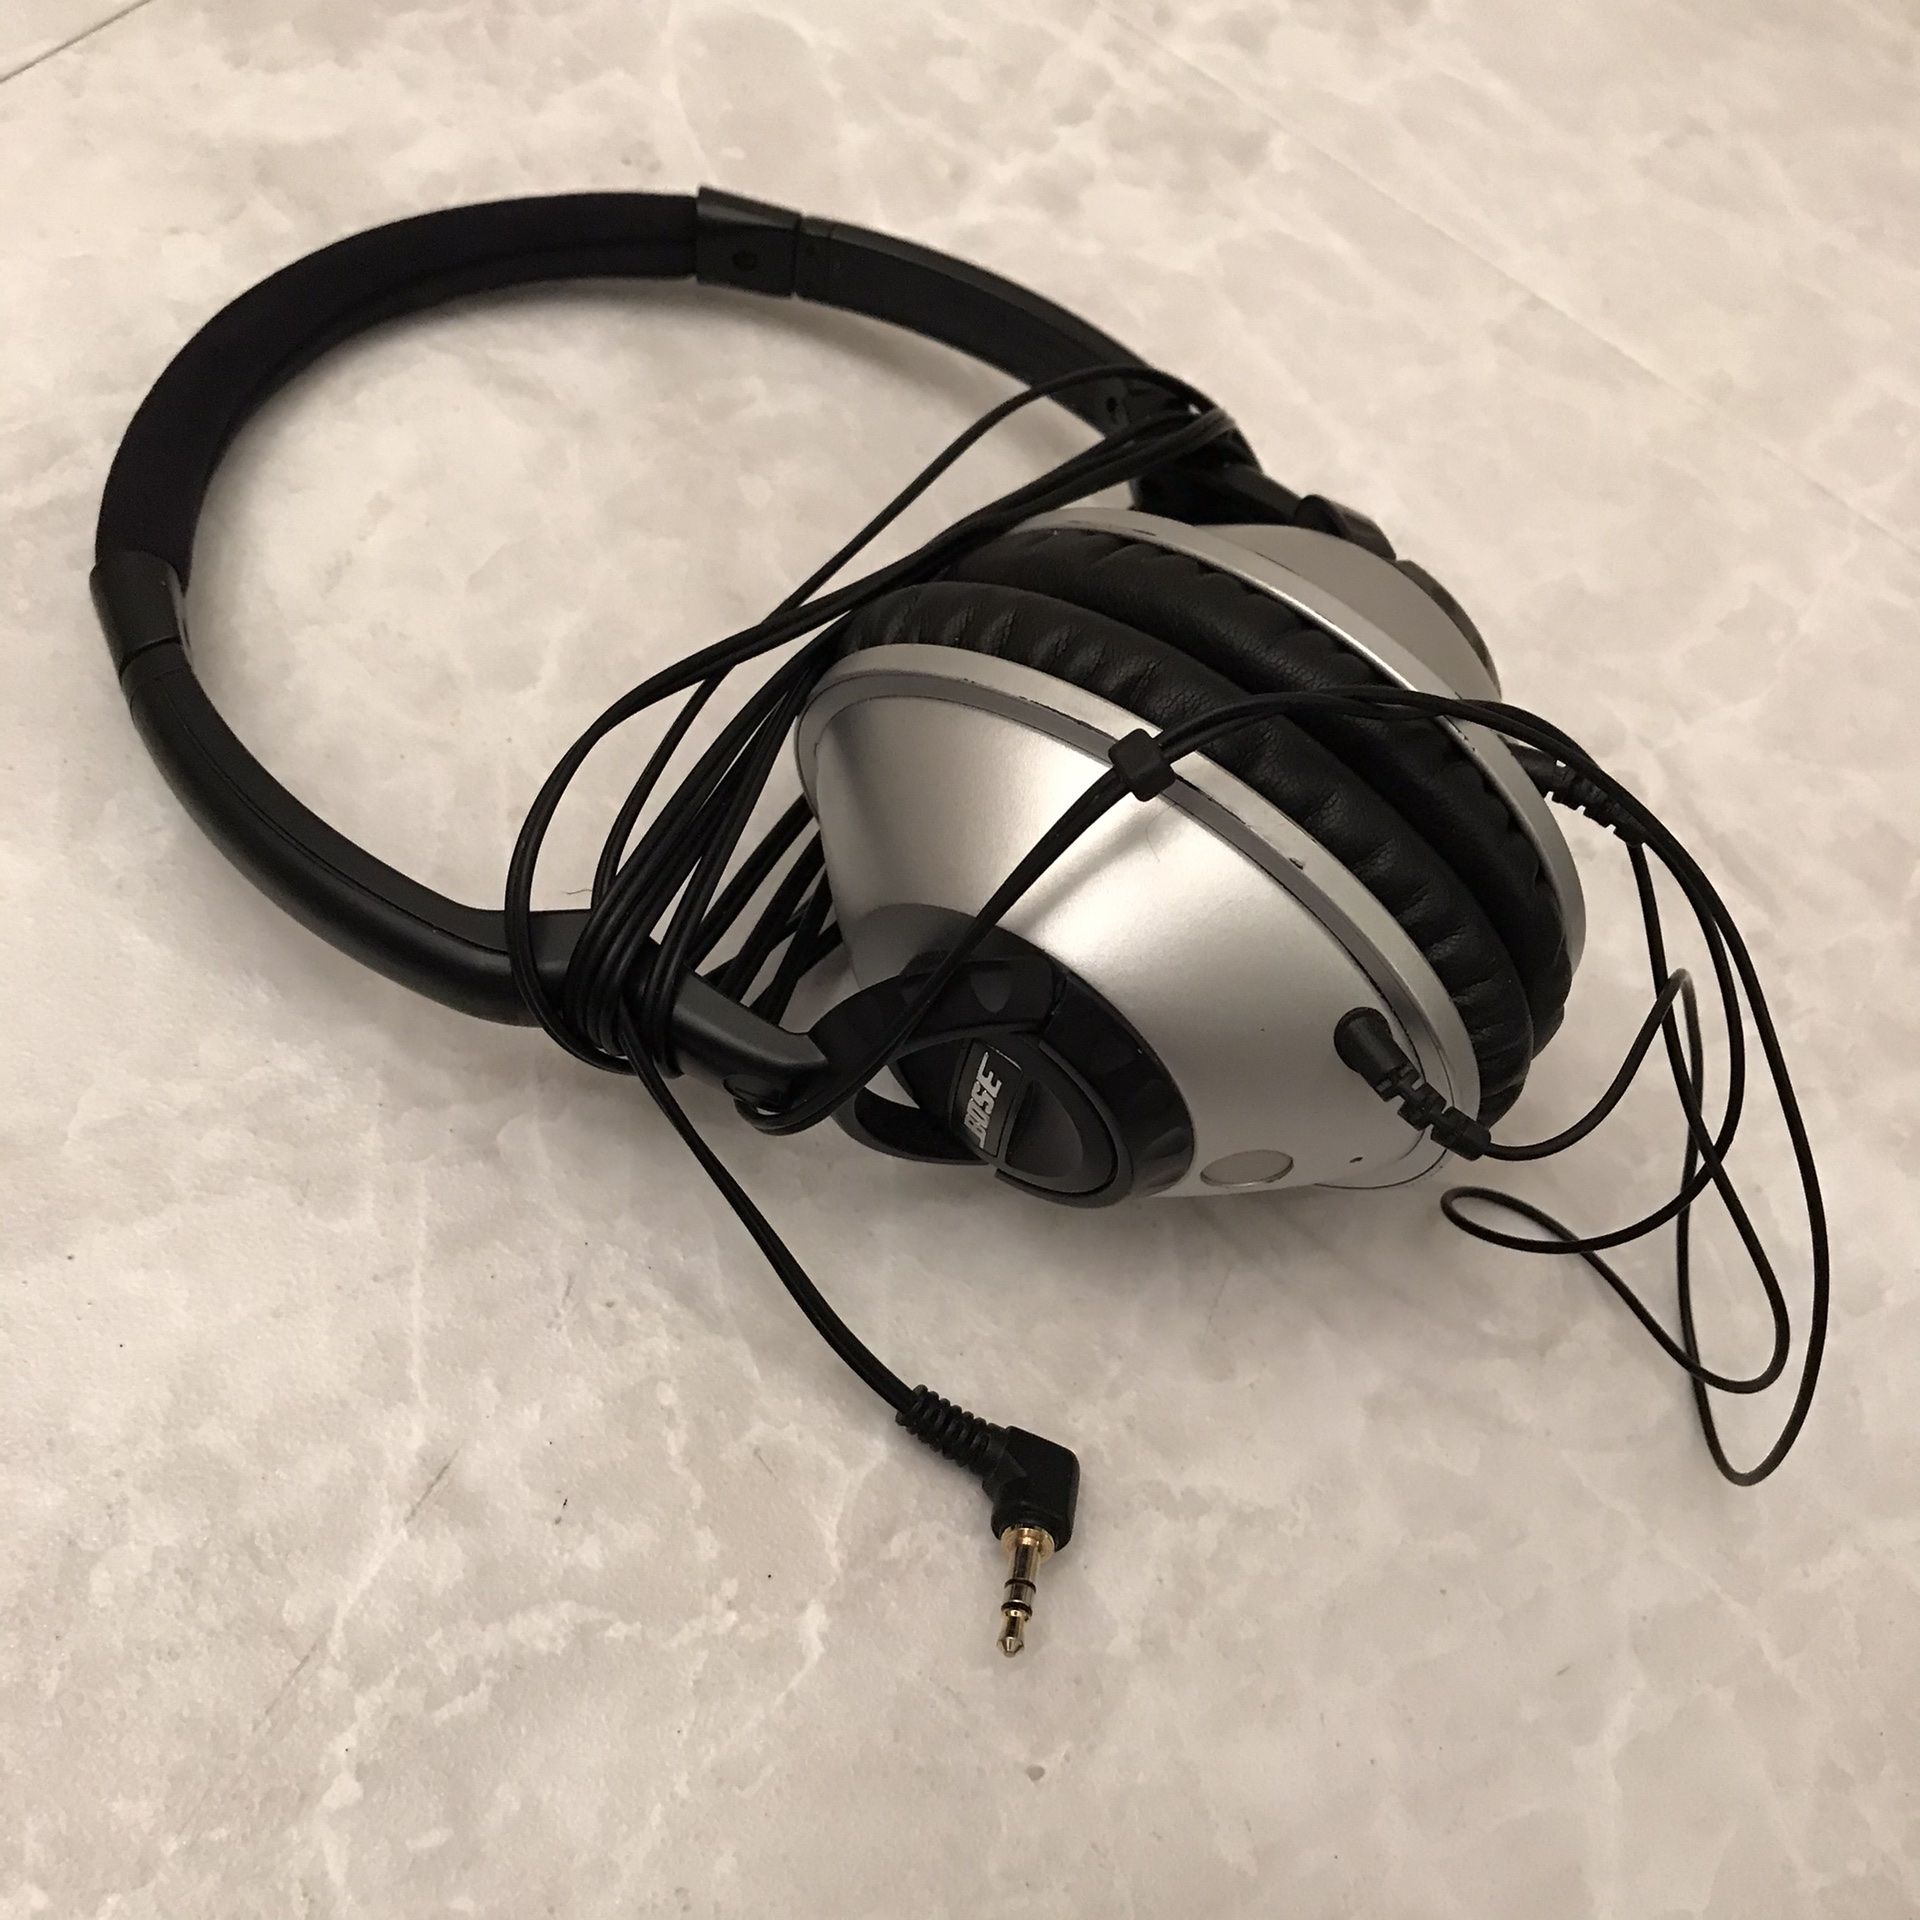 Bose Wired Headphone Tp-1a Clean Works New Earpads Installed Music